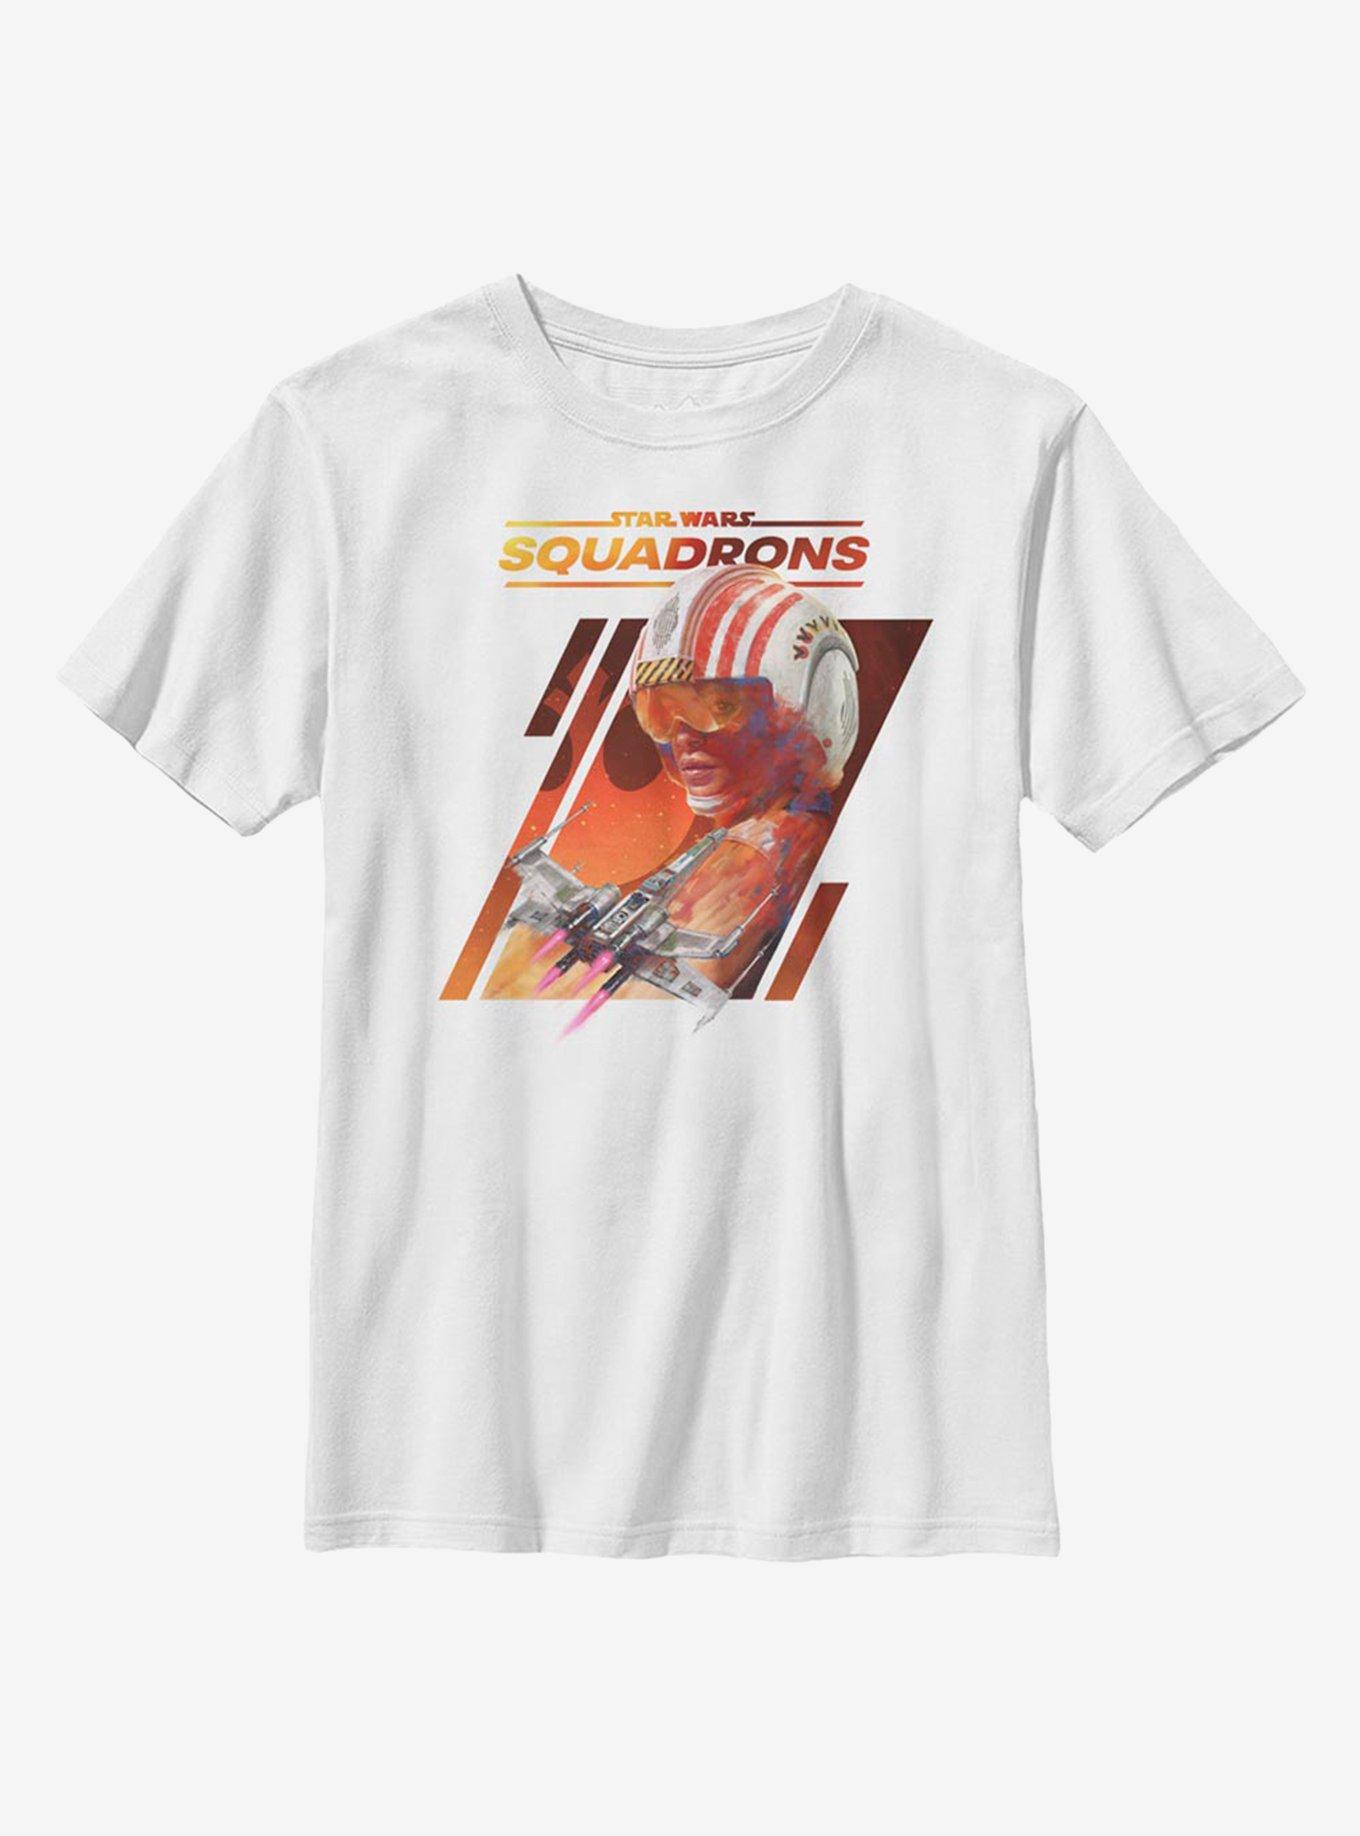 Star Wars Squadrons Rebel Youth T-Shirt, WHITE, hi-res